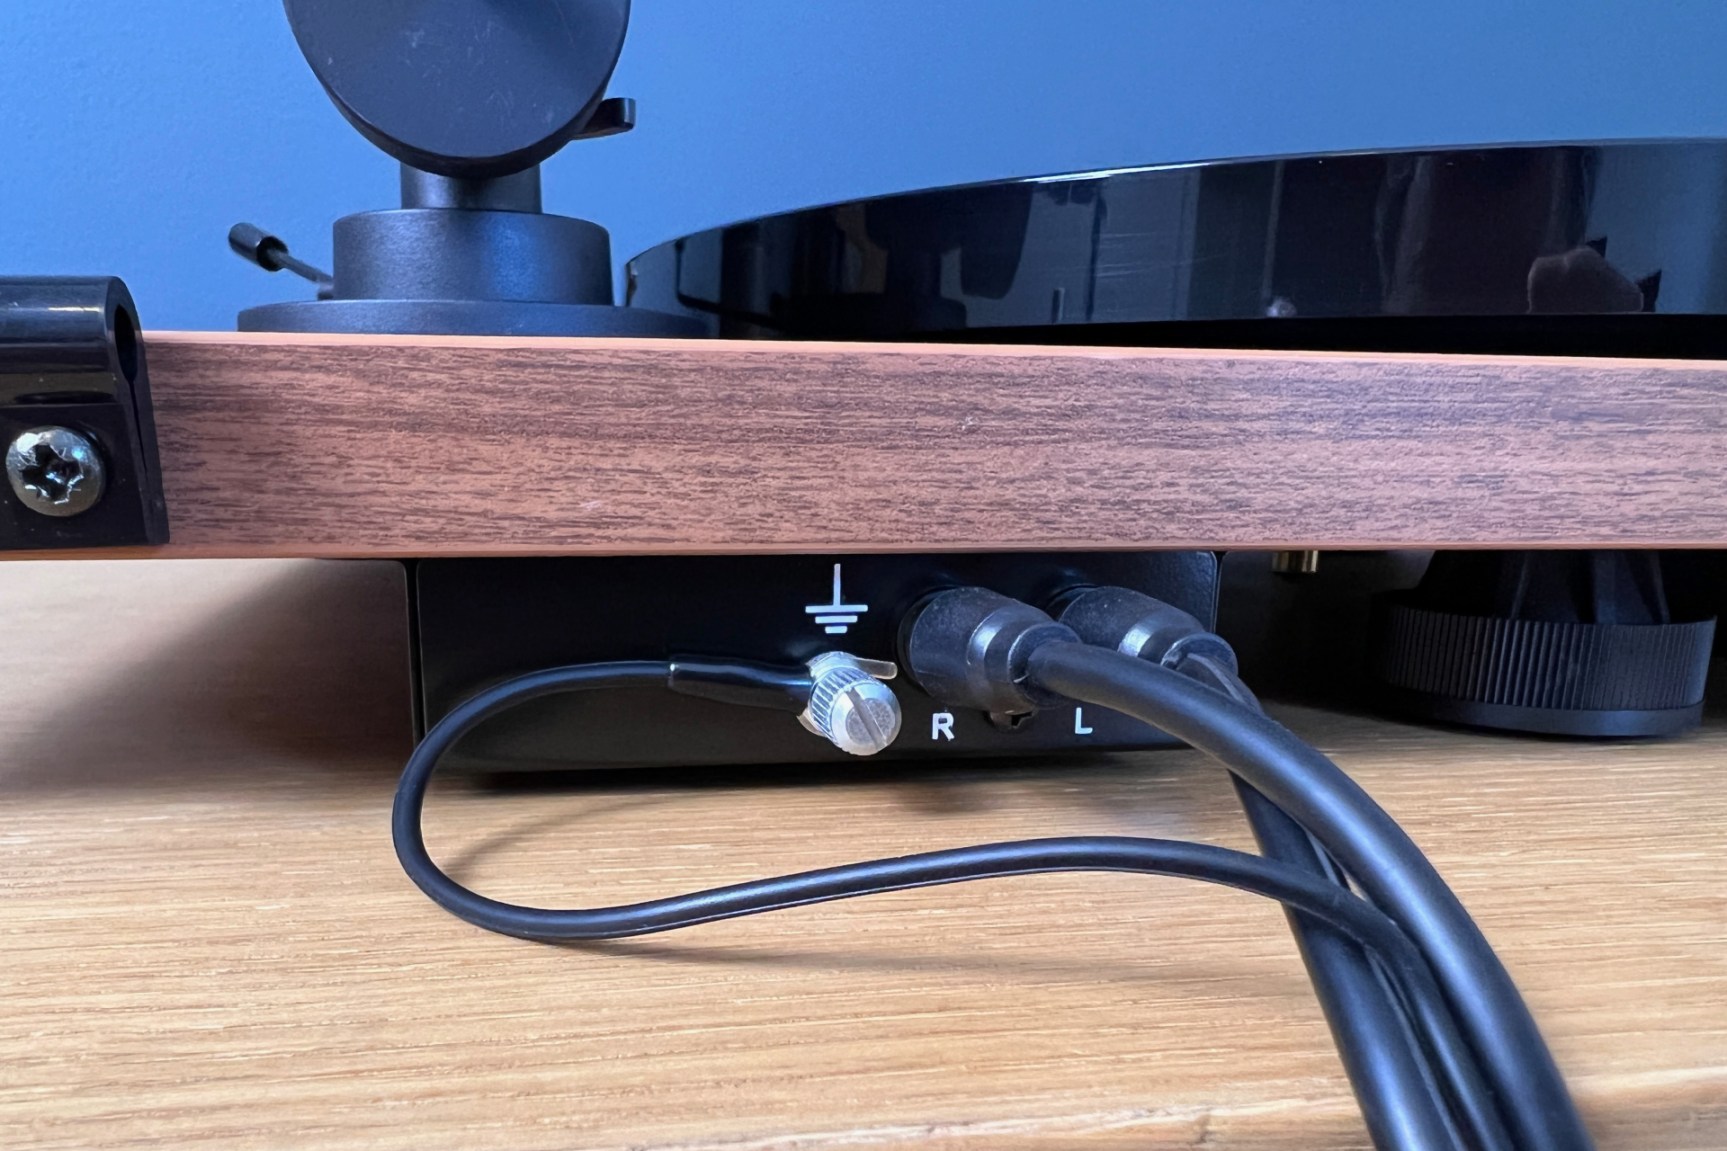 Pro-Ject Connect It E Phono Cable